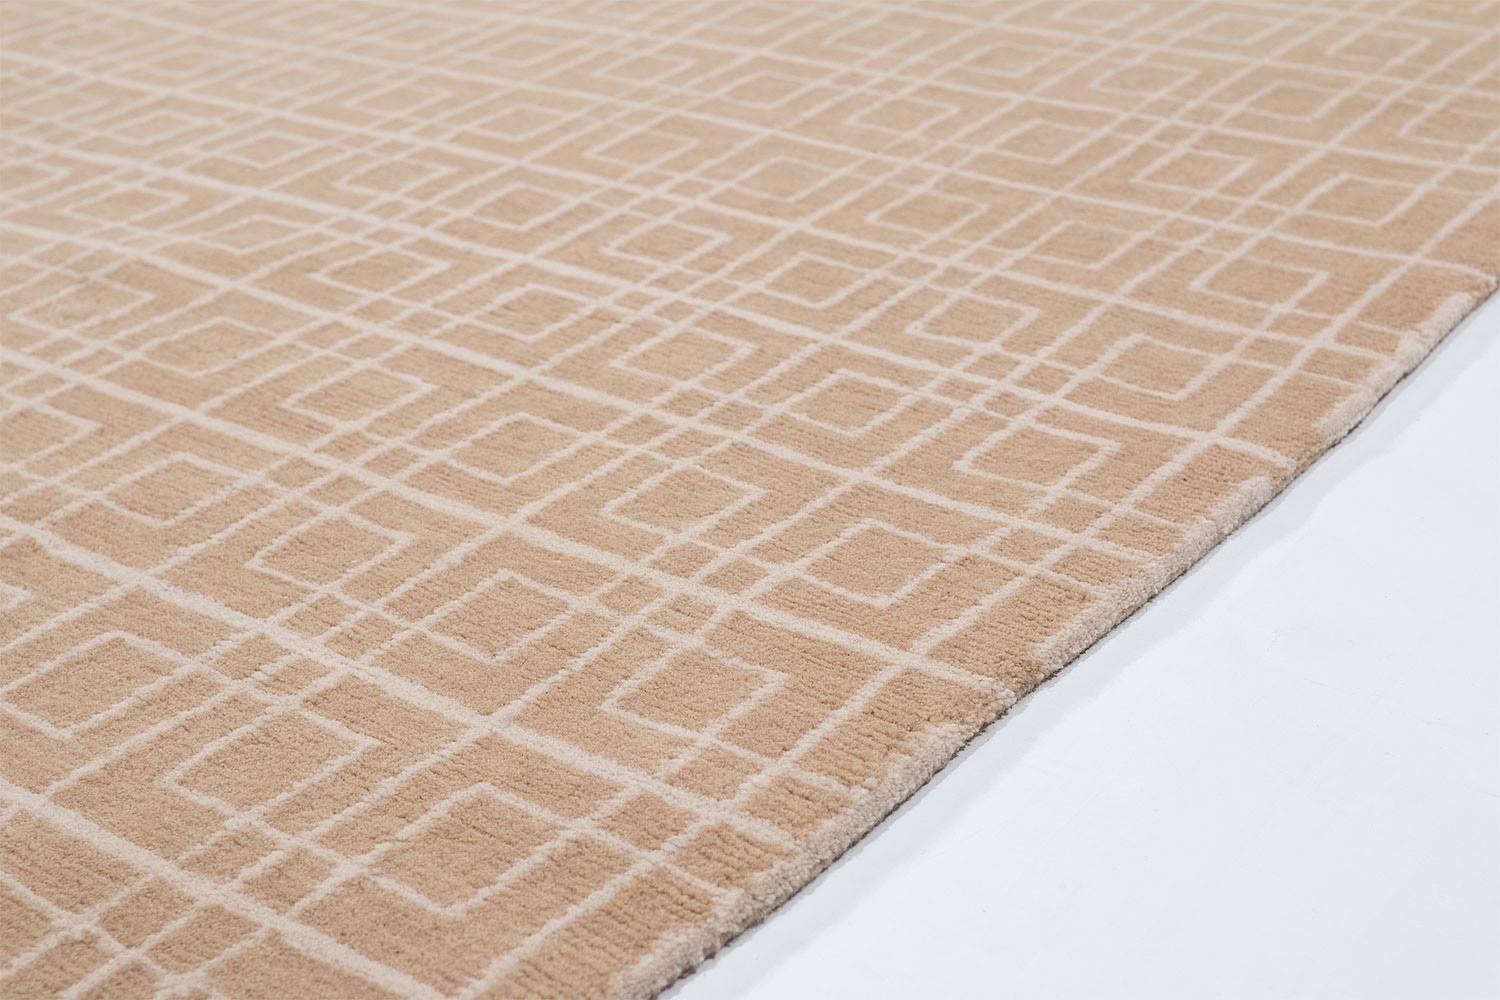 Nepalese Cream and White Deco Style Area Rug